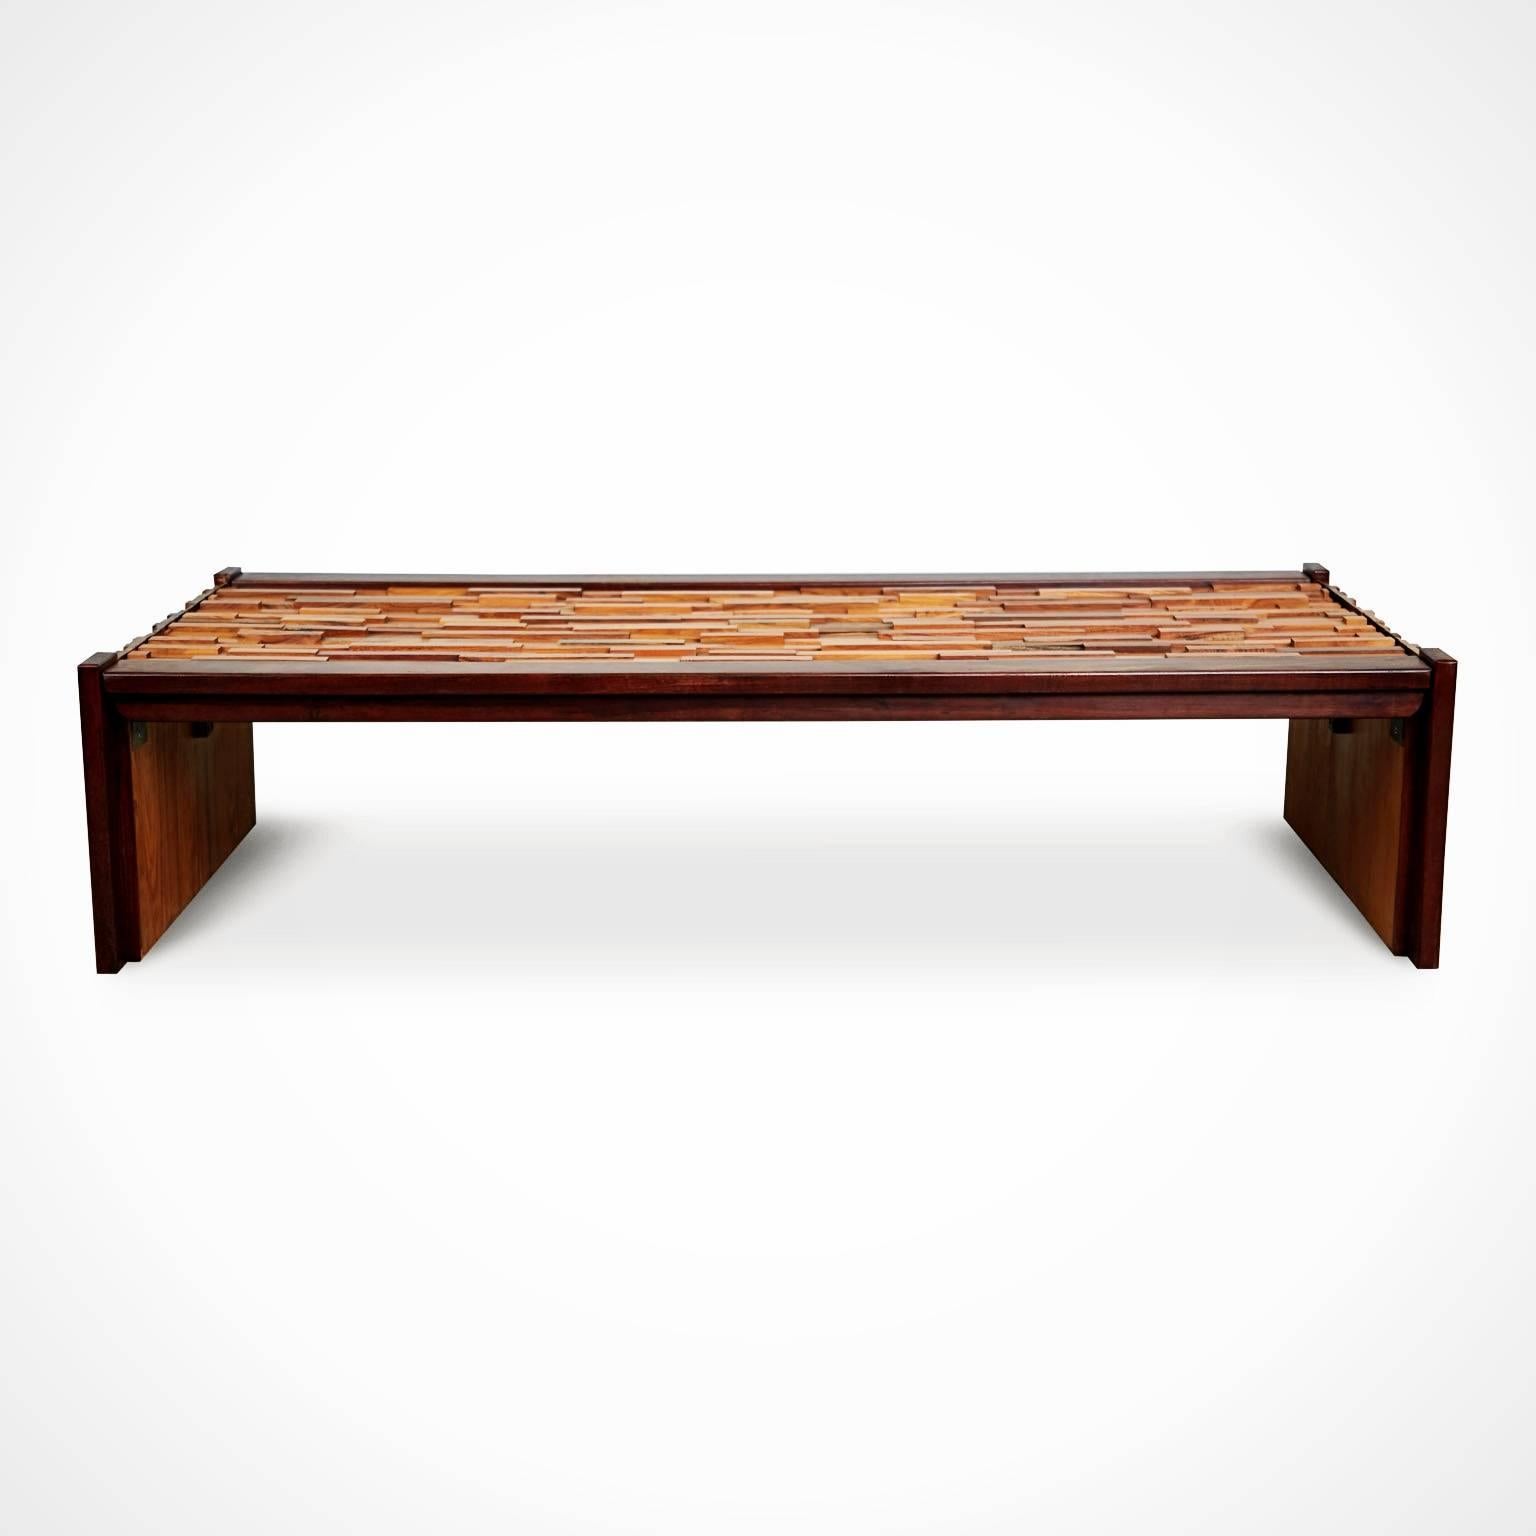 Expertly executed coffee table by Percival Lafer for L'Atelier De Sao Paulo, Brazil. This beautiful cocktail table is fabricated from Jacaranda Rosewood and Teak featuring a waterfall design which is decorated with a Brutalist style surface made up